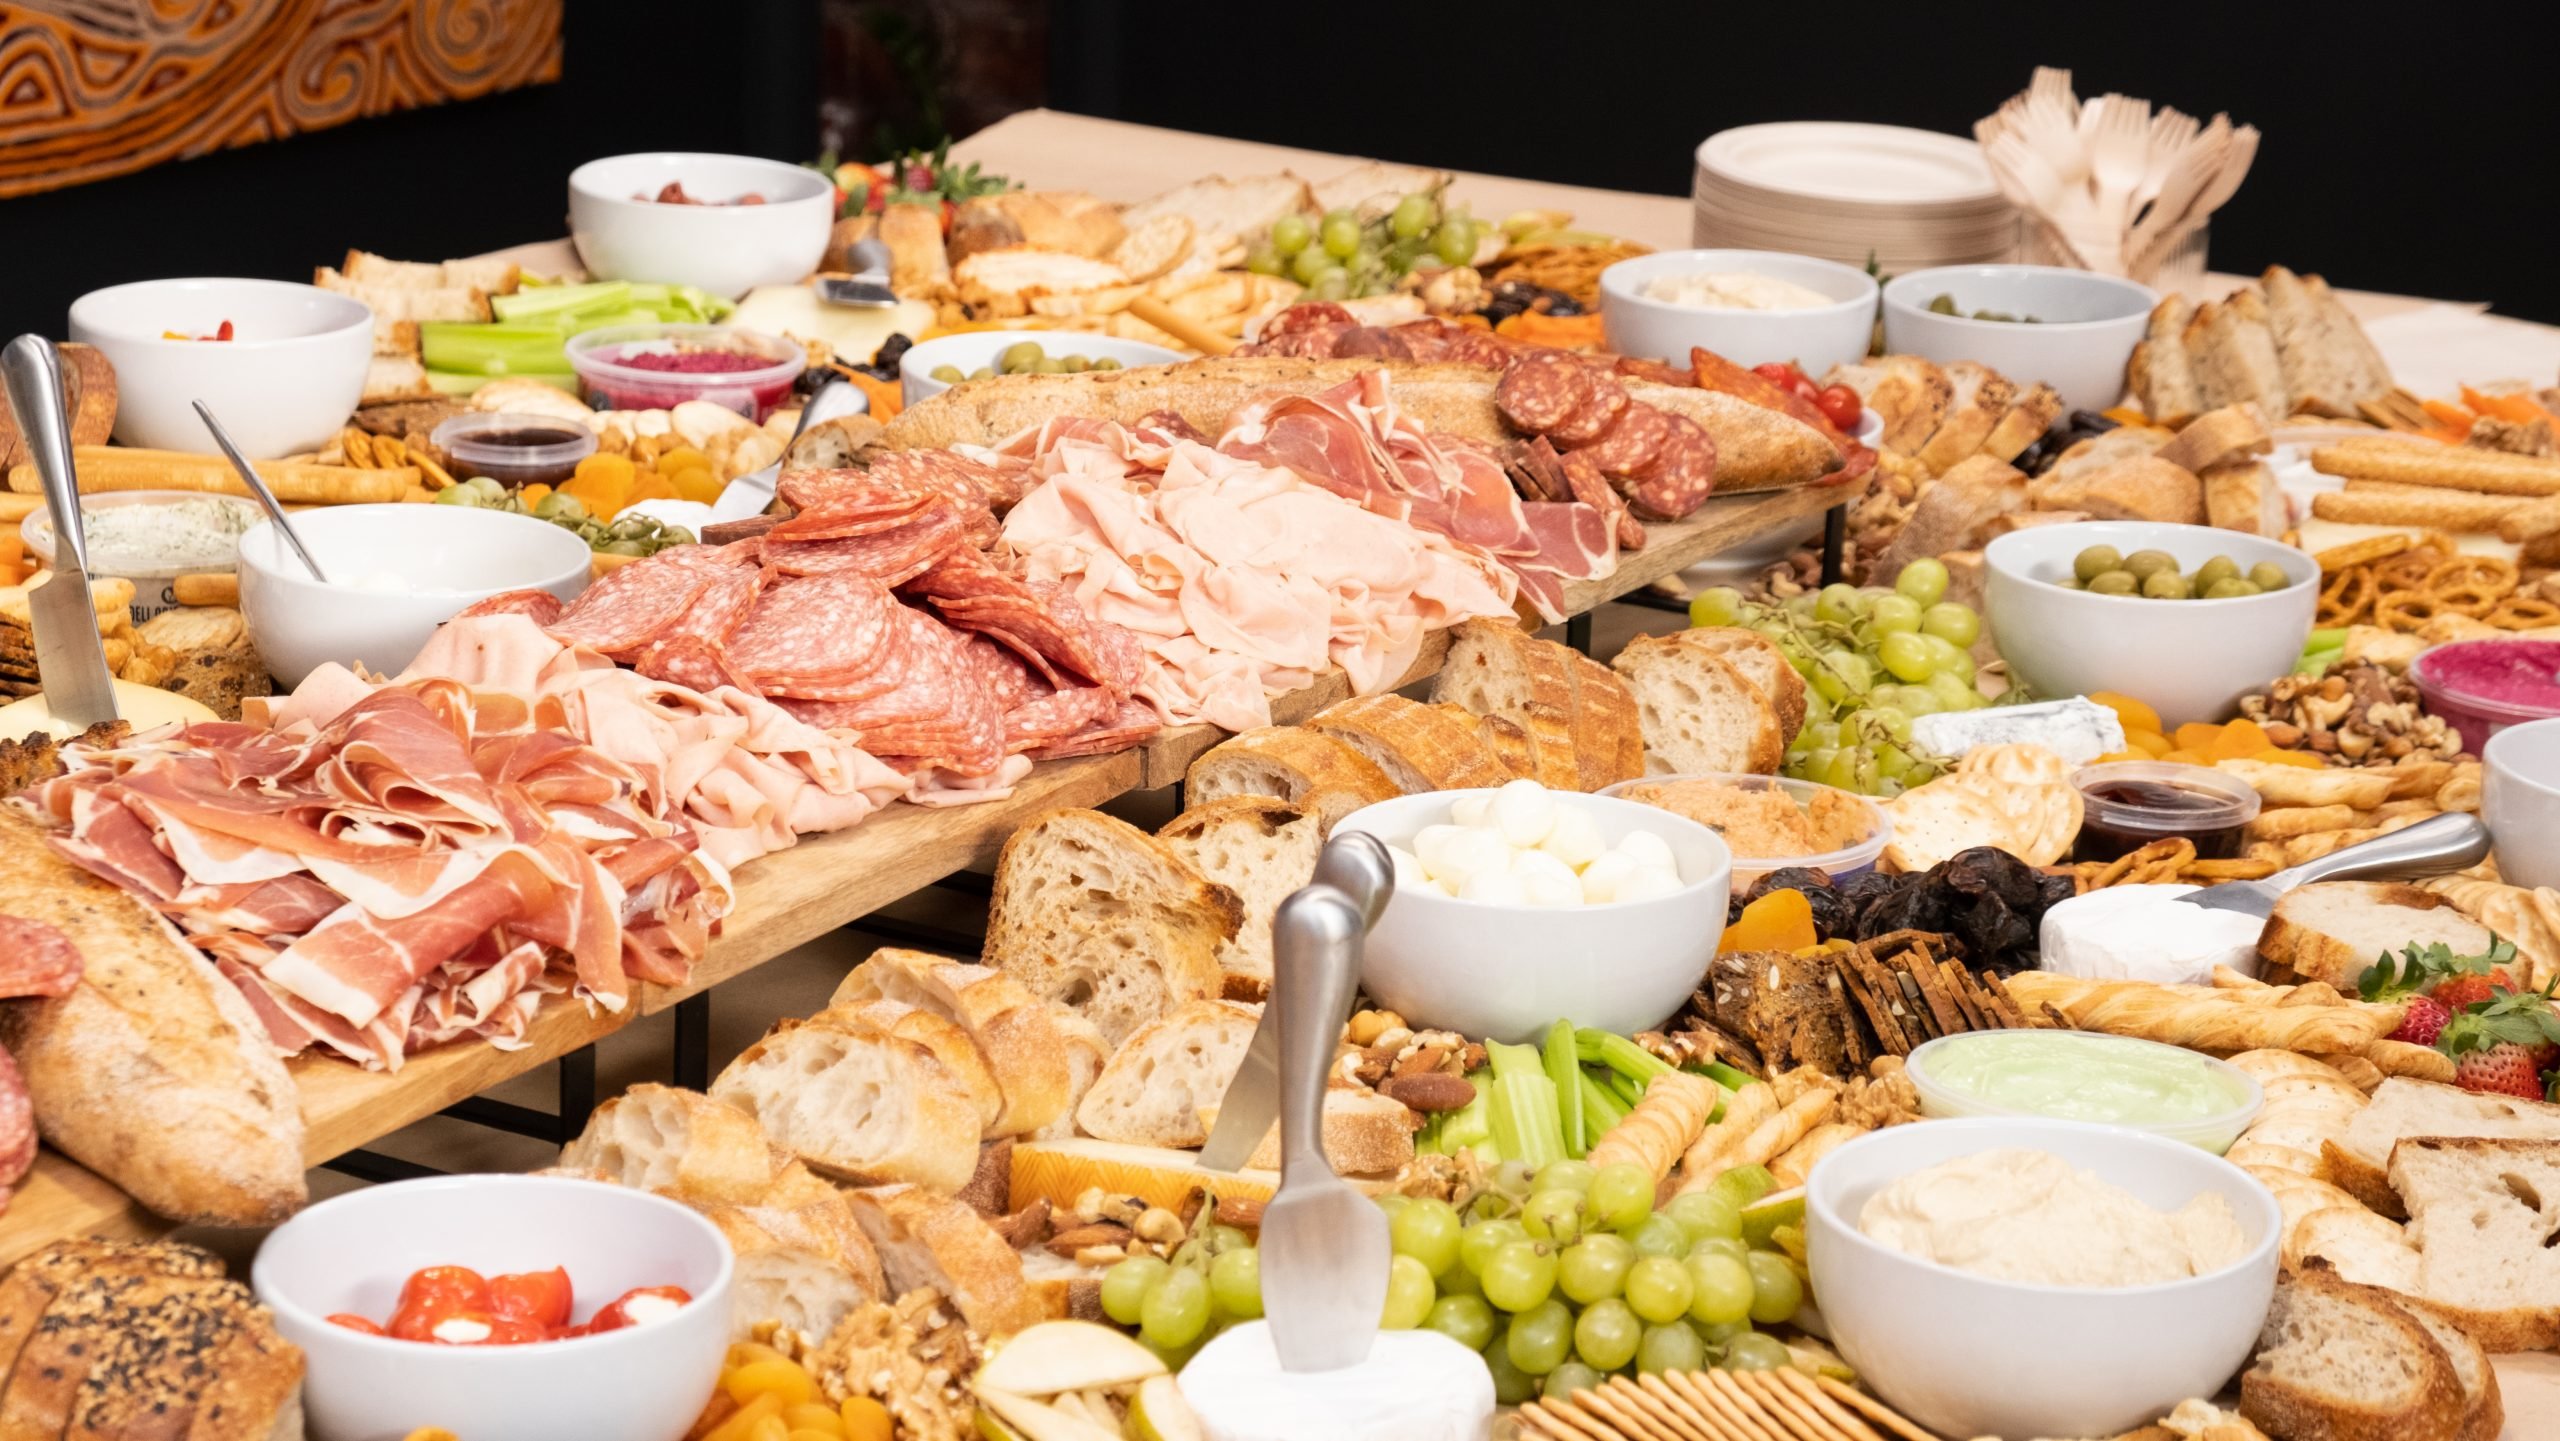 This Delicious Grazing Board That Pleased Many Guests at the Melbourne Gallery Opening.